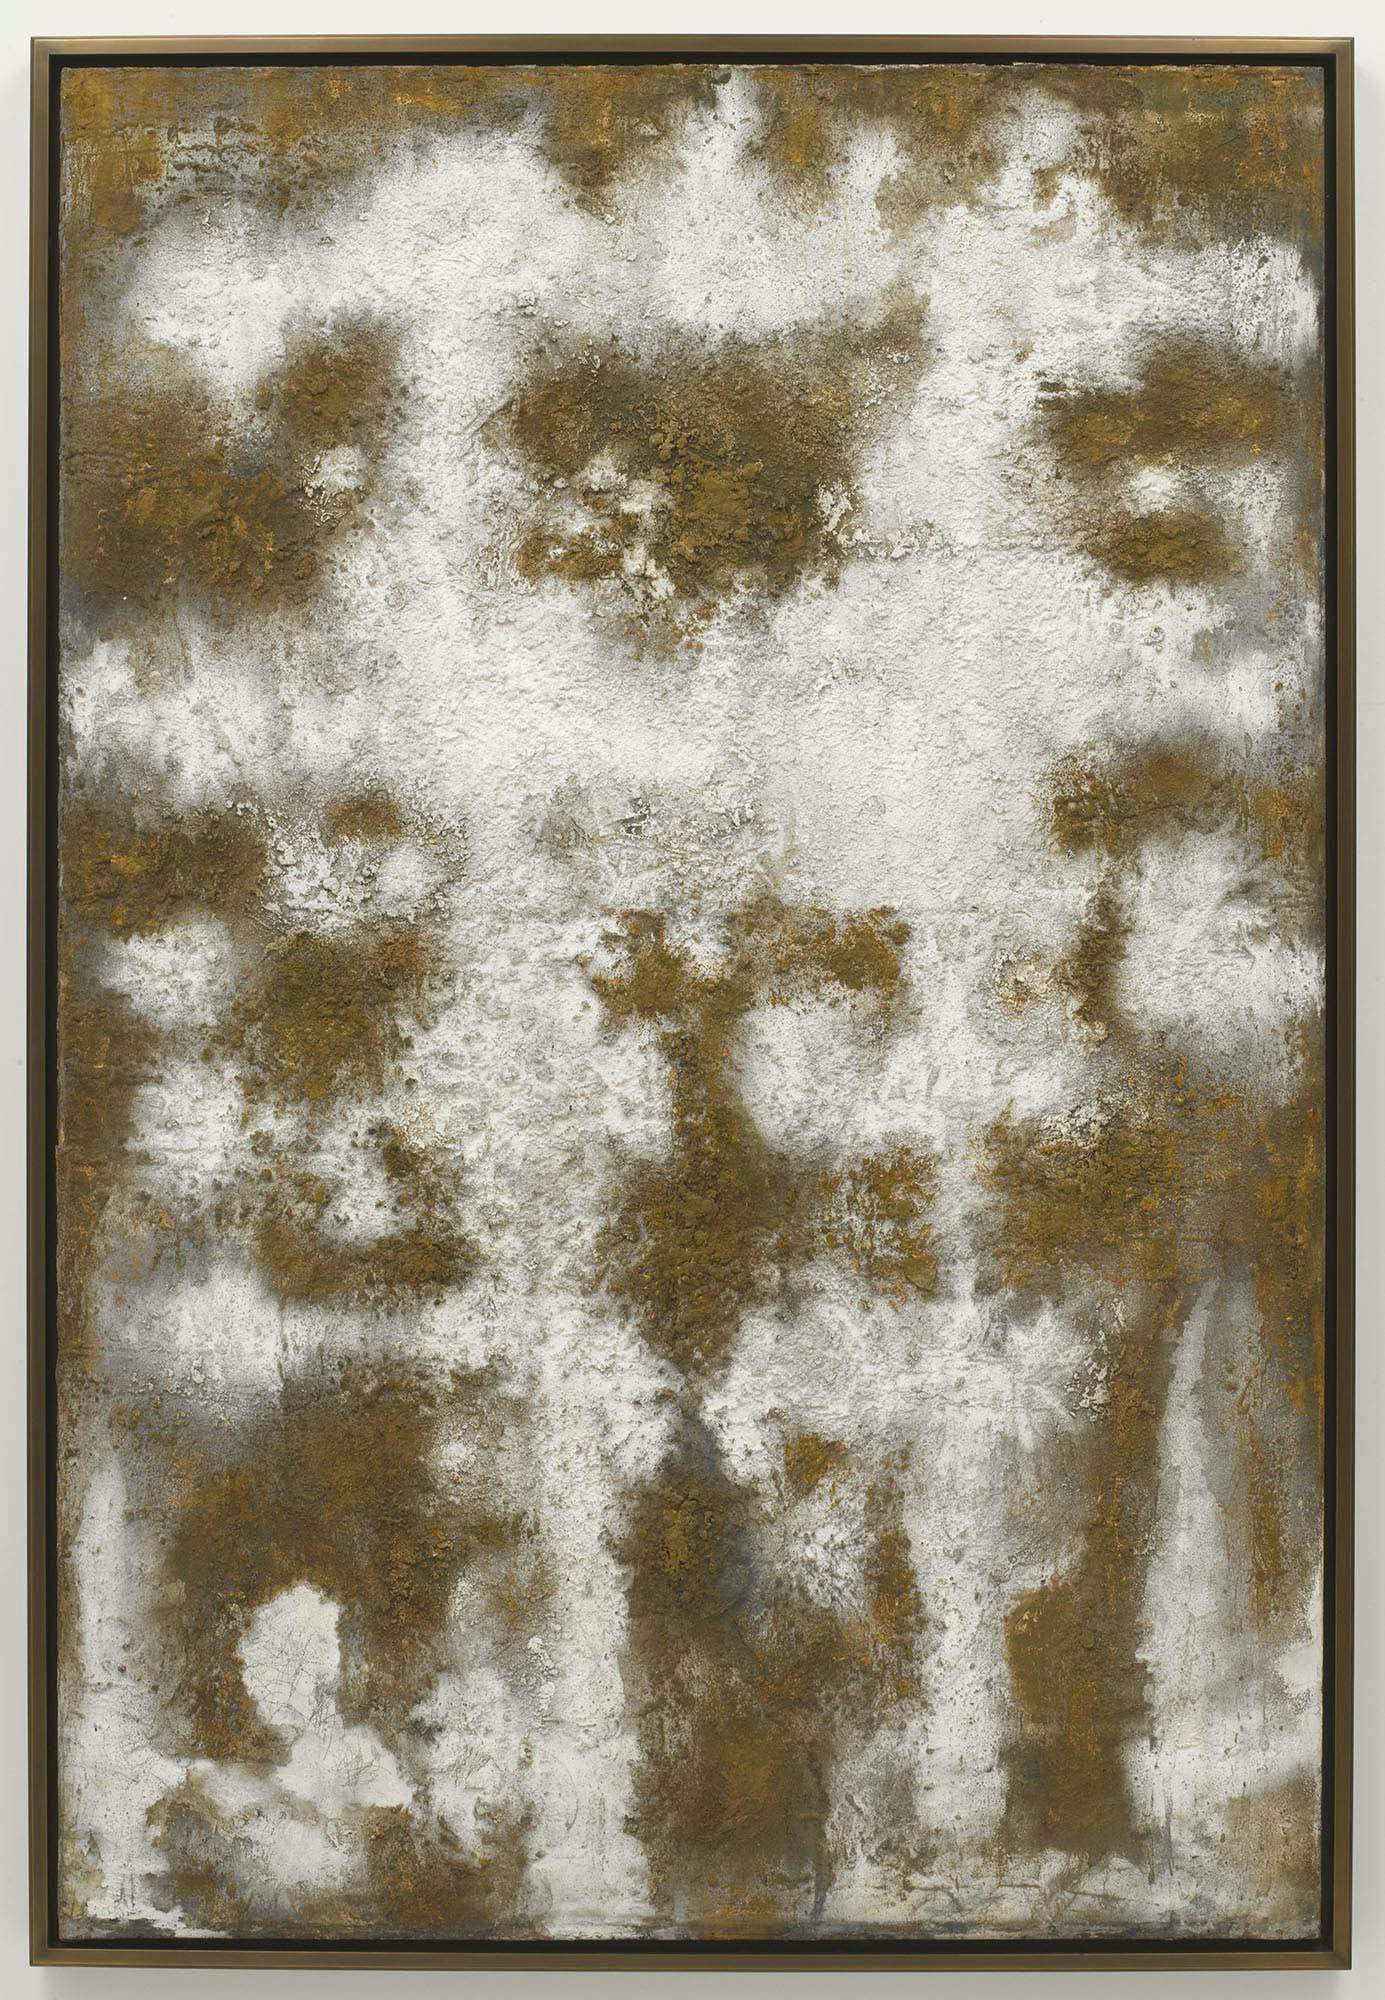 Presence
1956
Oil on canvas
65 1/2 x 44 in. (166.4 x 111.8 cm)
 – The Richard Pousette-Dart Foundation